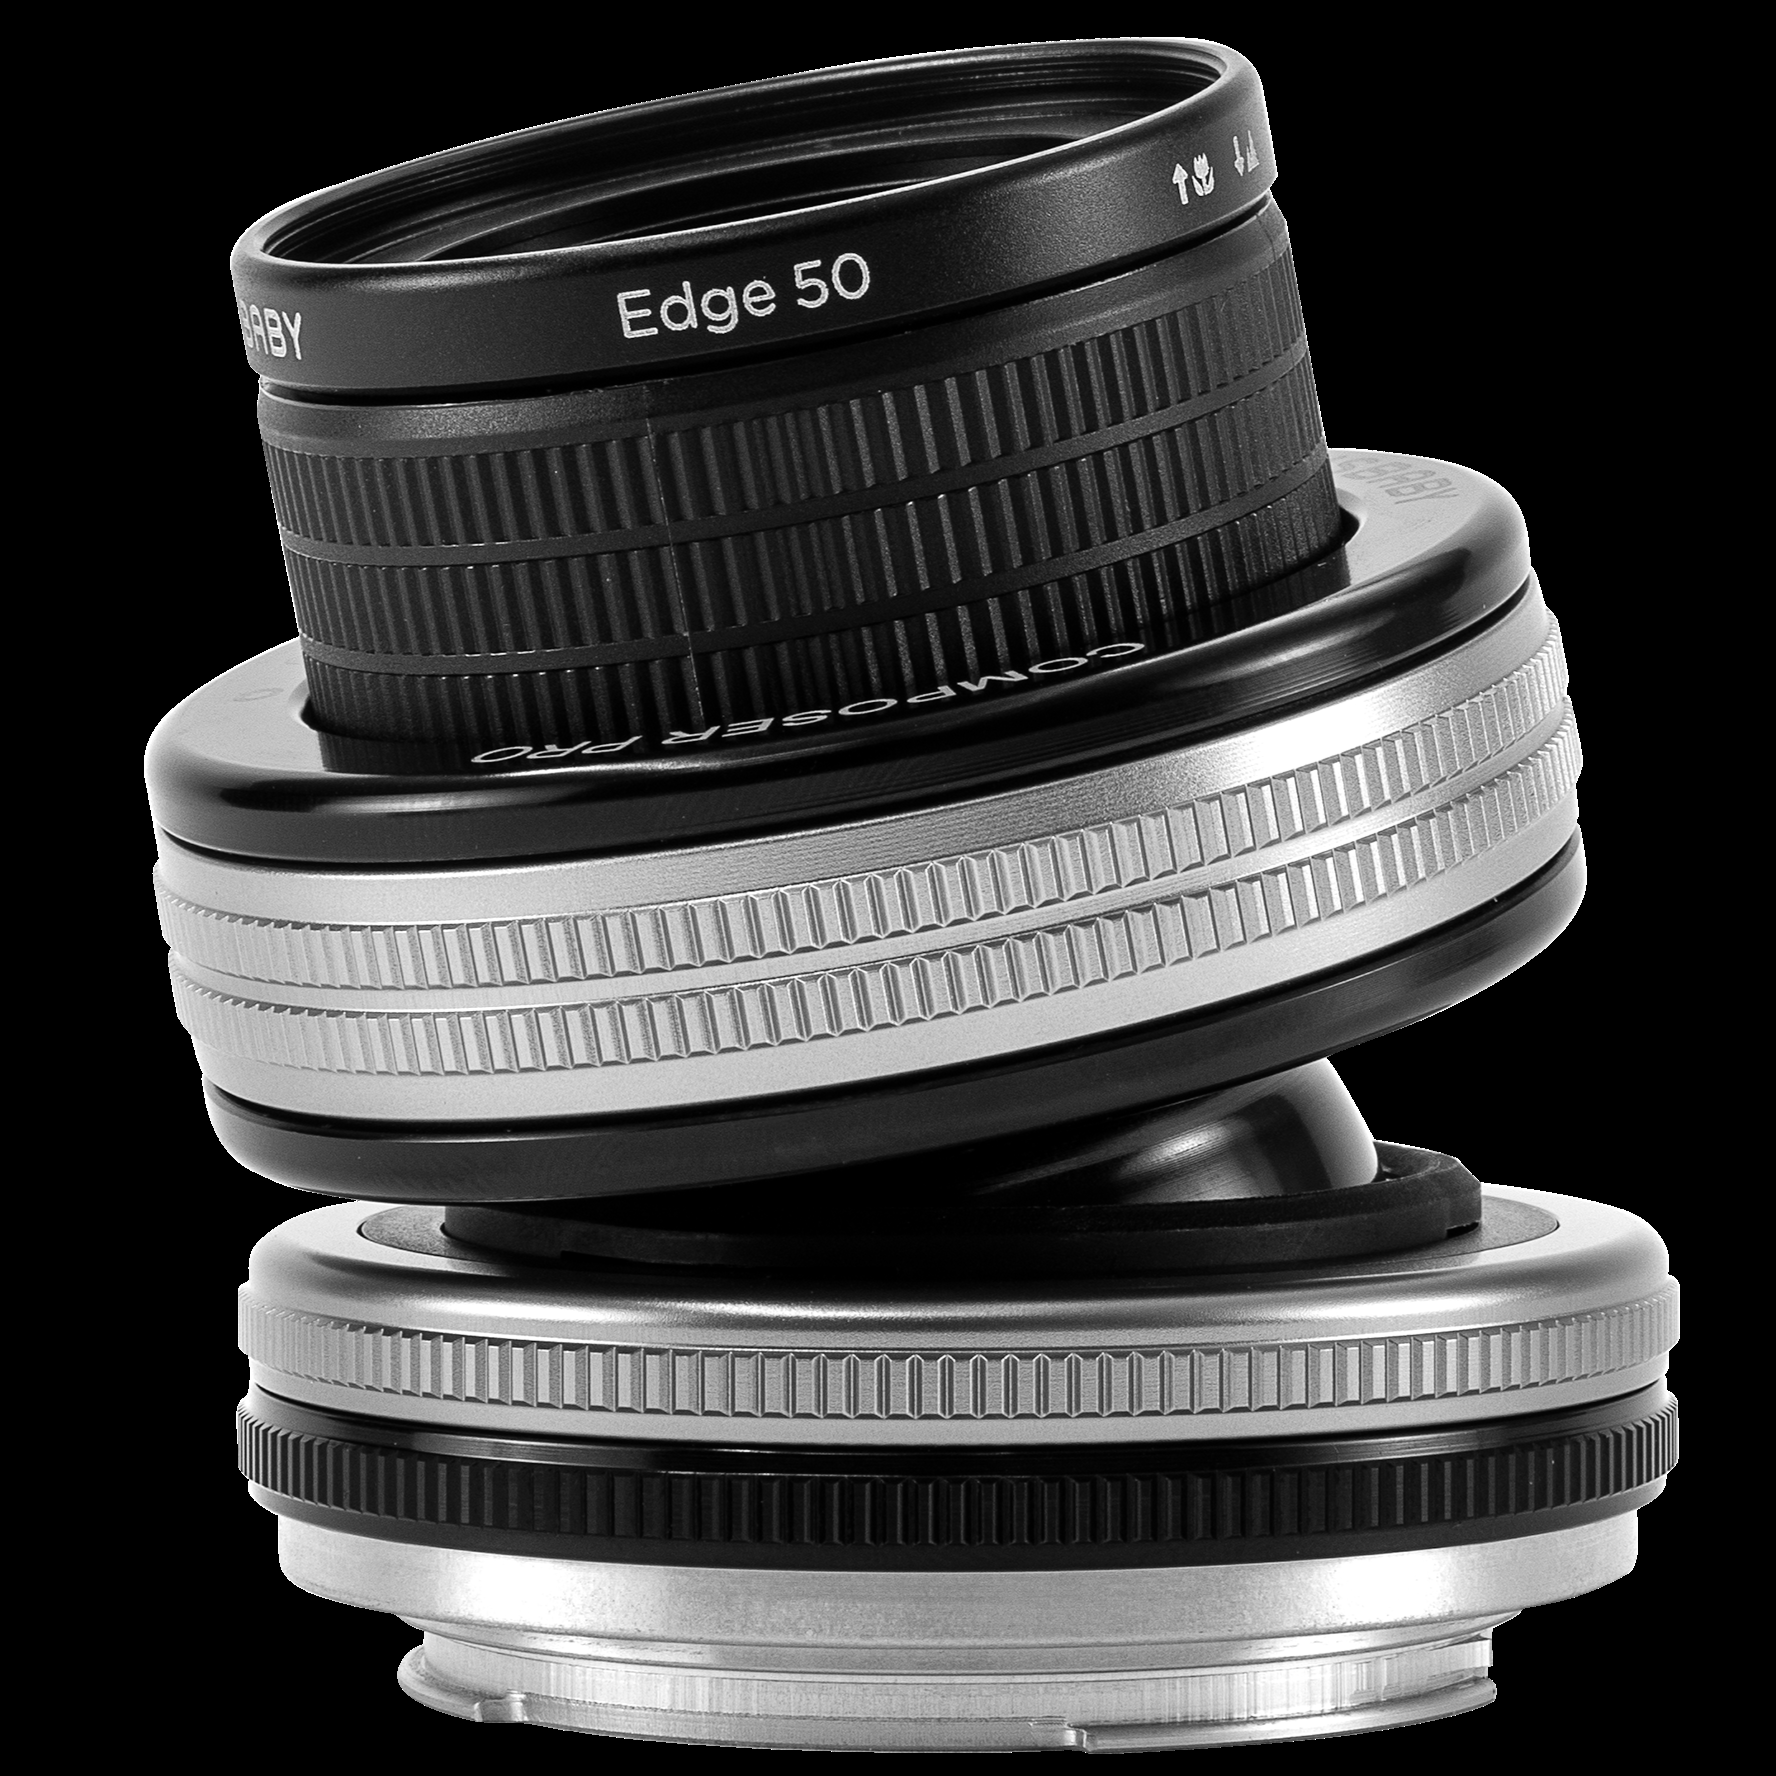 Lensbaby Composer Pro II with Edge 50 Optic for Sony E